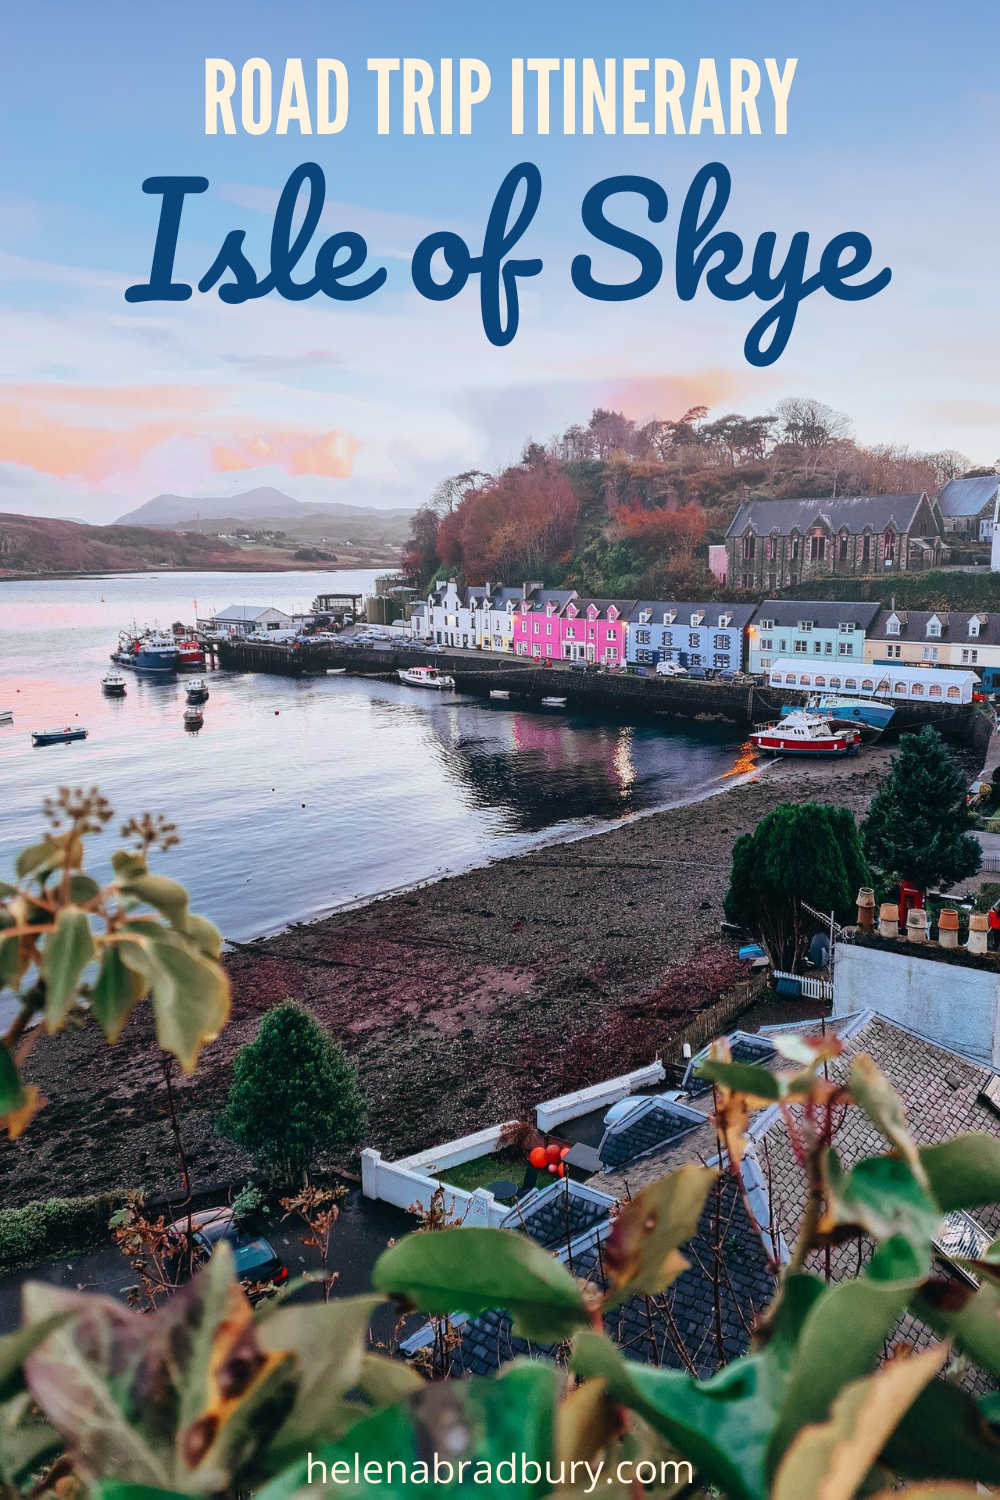 Visit the stunning Isle of Skye, Scotland in the Scottish Highlands and islands on this perfect Isle of Skye itinerary for 3 days. 3 Days in Isle of Skye is perfect to see iconic places like Old Man of Storr, the Fairy Pools, Fairy Glen and Talisker…